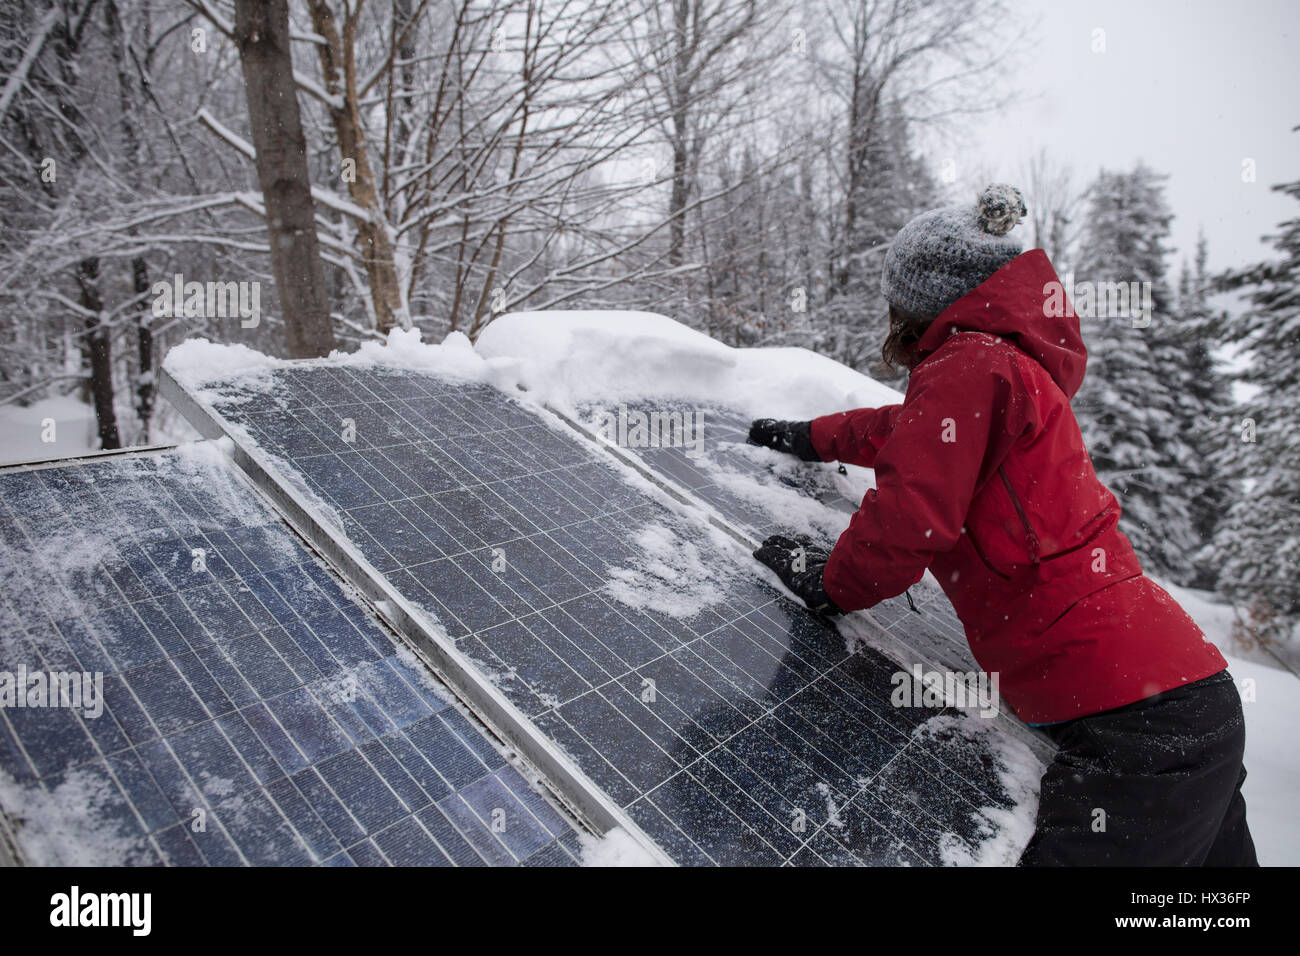 A lady in a red jacket clears snow off the solar panels after a snowstorm in Hastings Highlands, Ontario, Canada. Stock Photo